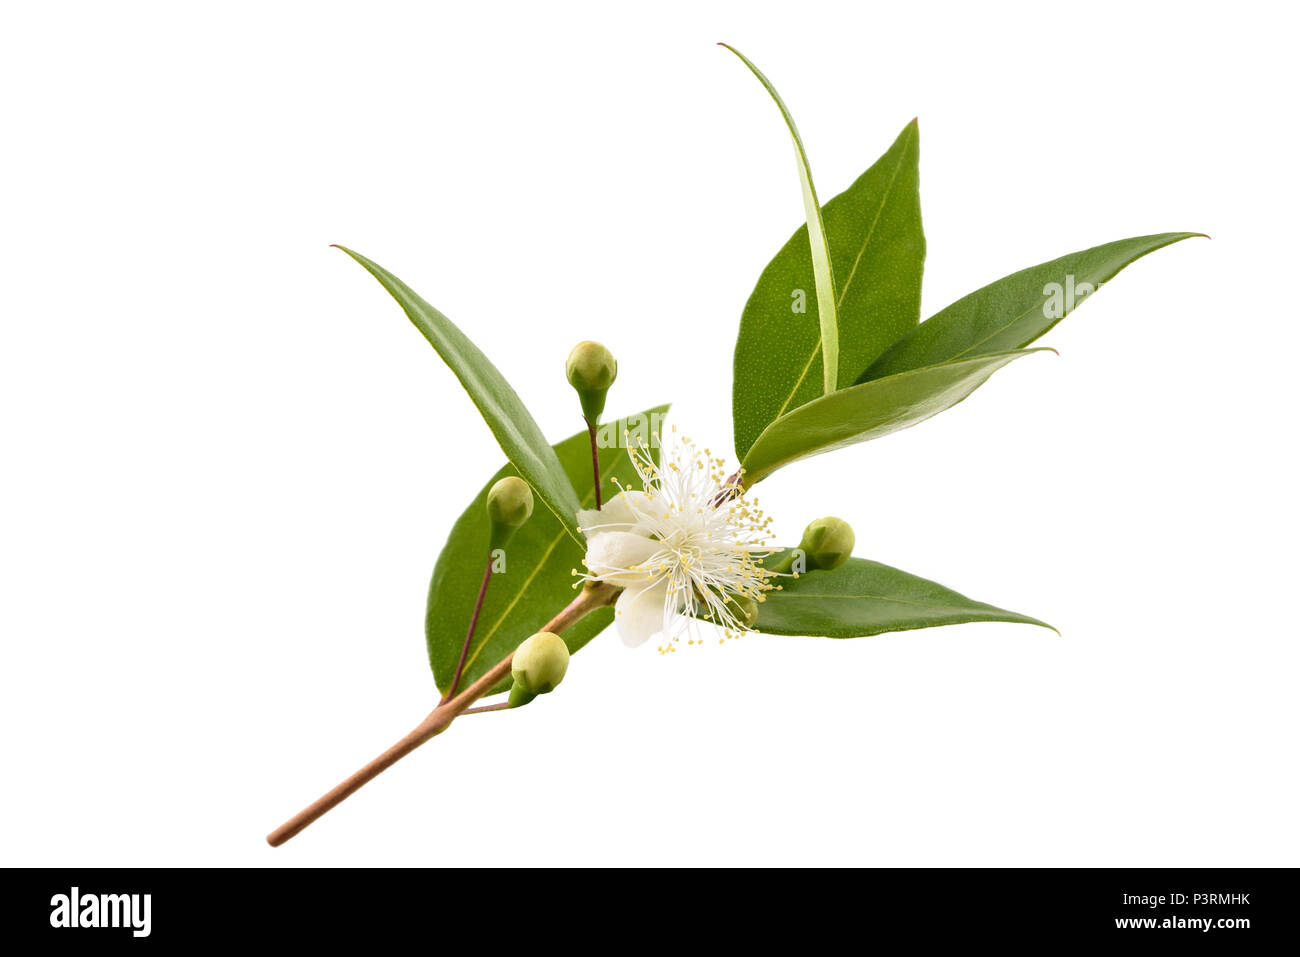 common myrtle branch with flowers isolated on white Stock Photo